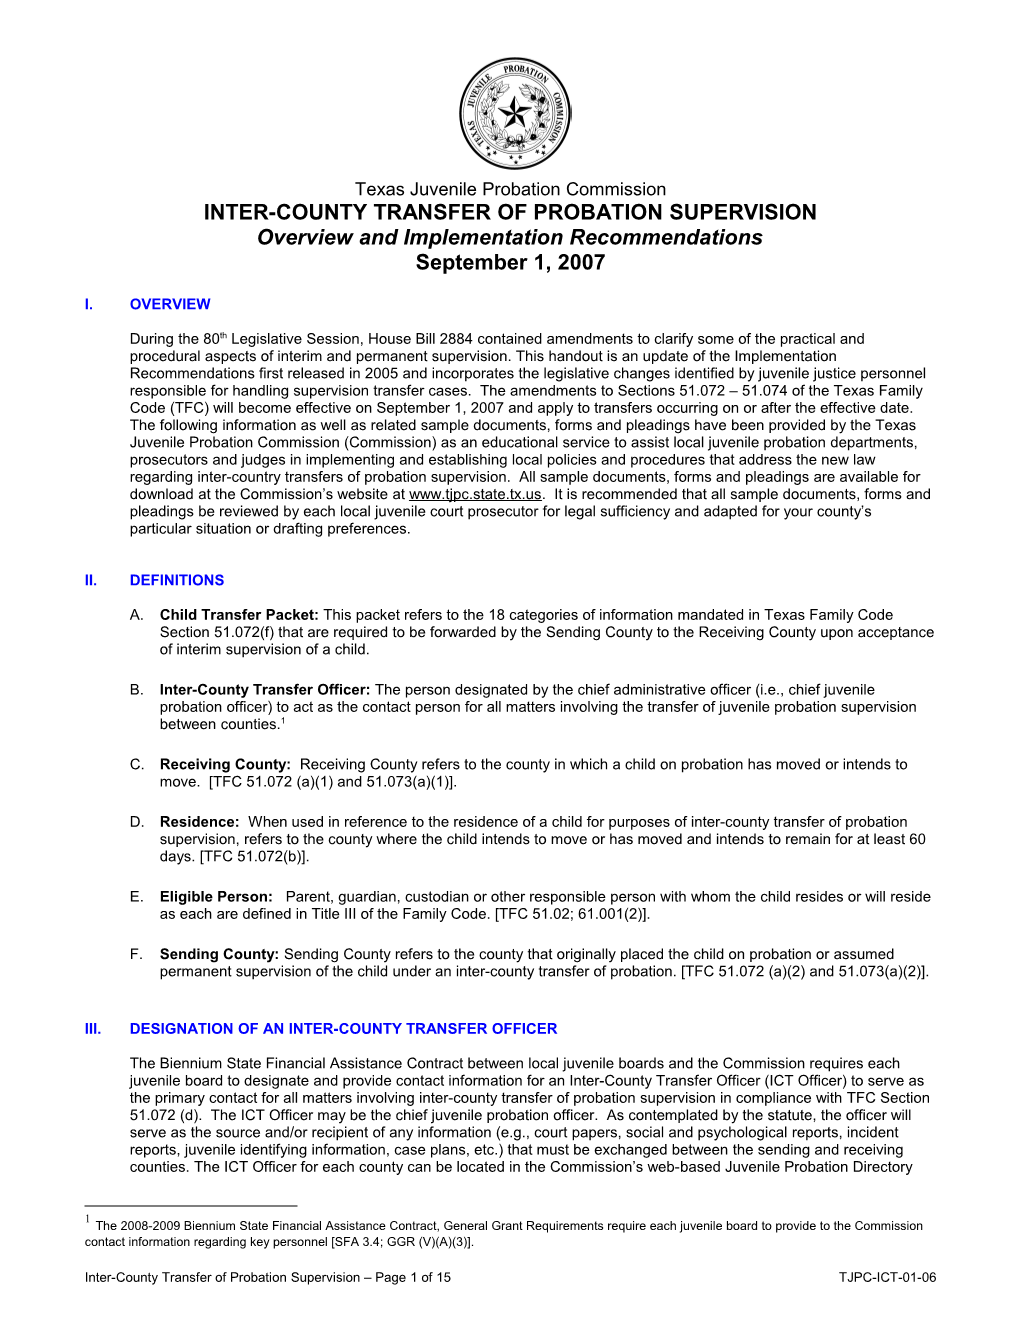 TJPC-ICT-01-06 Inter-County Transfer of Probation Supervision Overview and Implementation